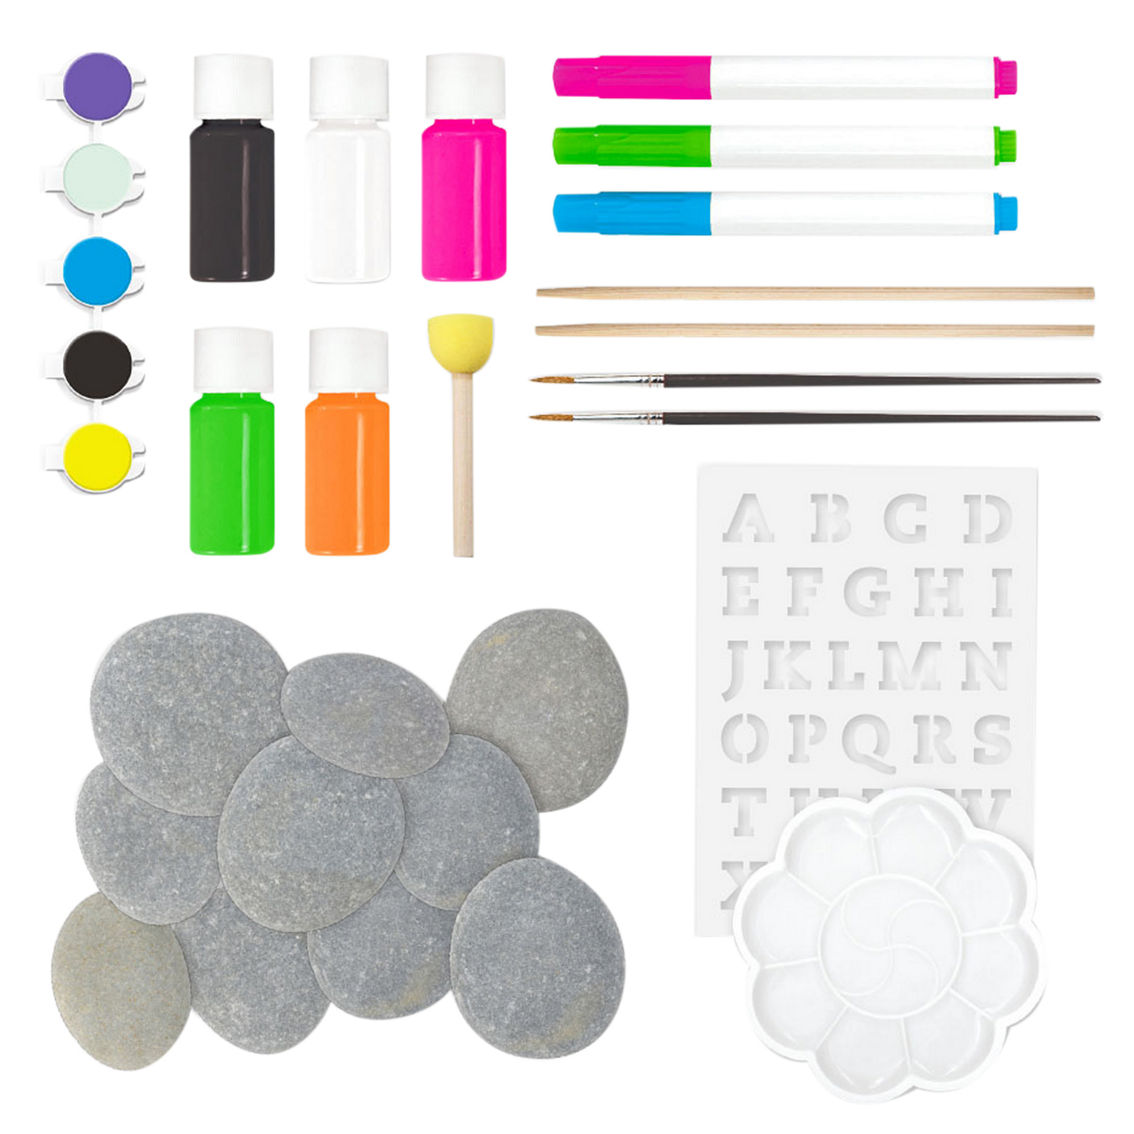 The Complete Neon Rock Art Kit - Image 4 of 6